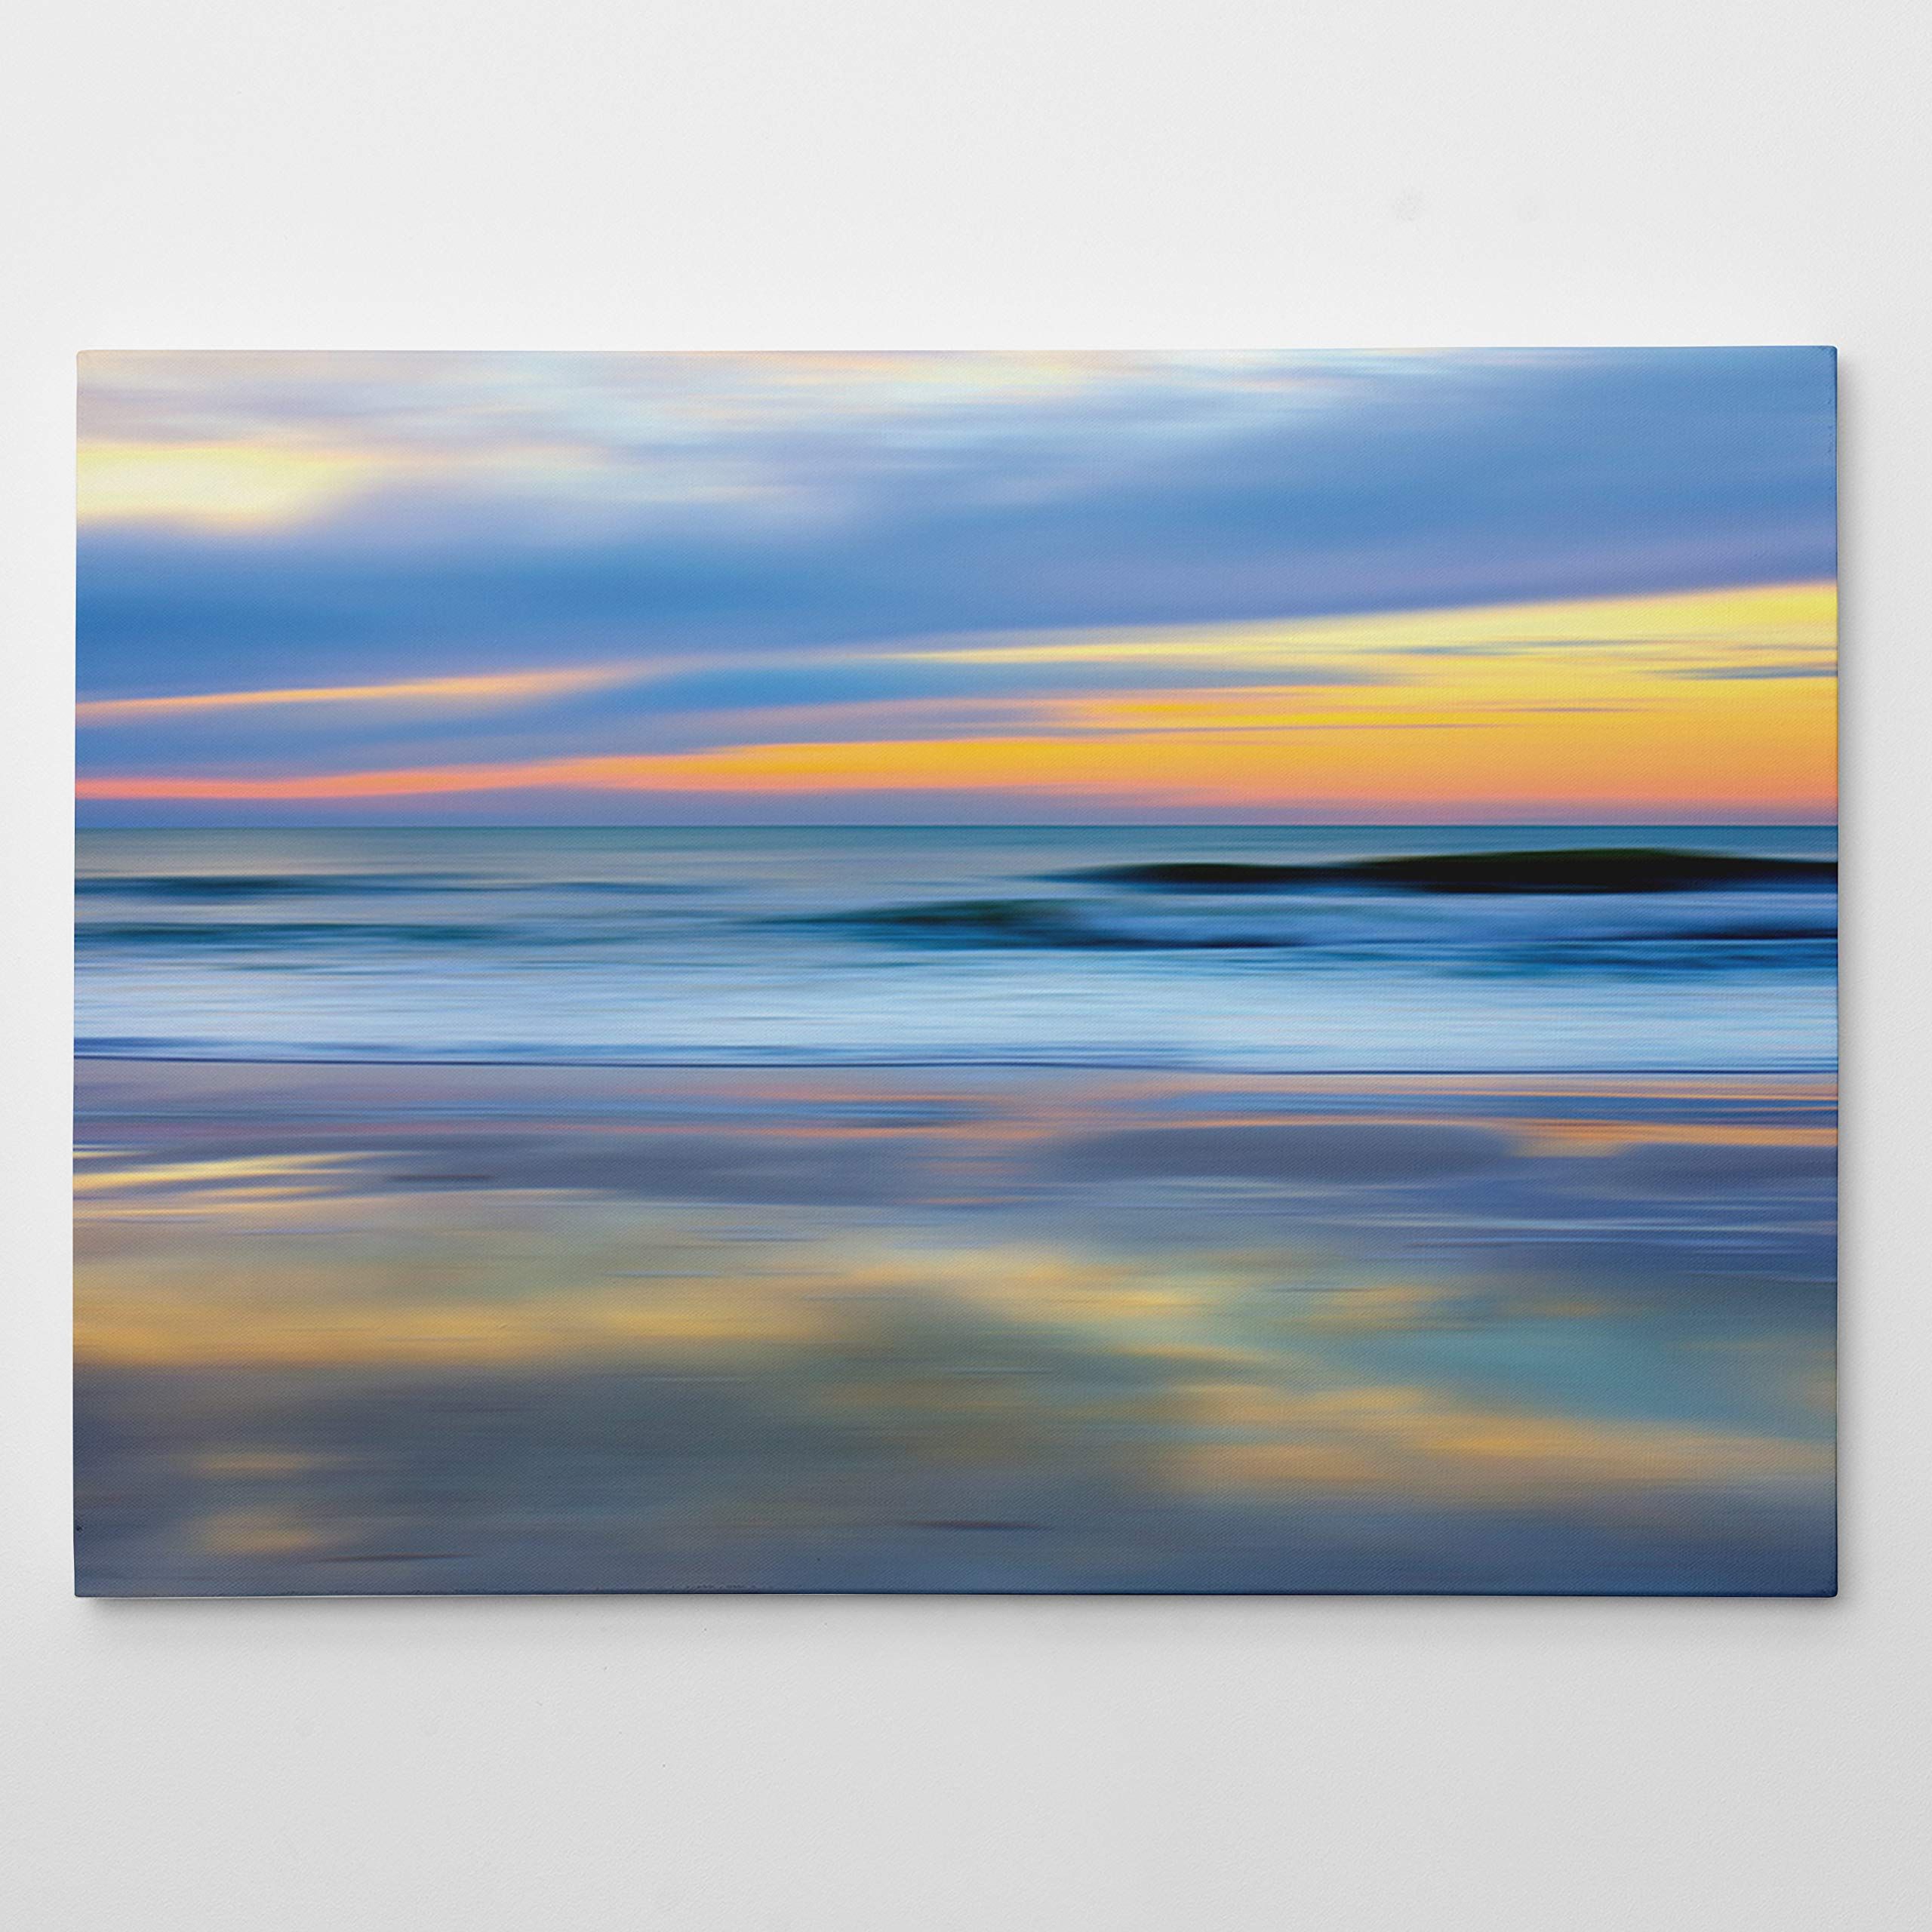 Amazon: Renditions Gallery Pastel Sunset Art Wall Décor For Home,  Office, Bedroom, Living Room 32x48: Posters & Prints In Most Up To Date Pastel Sunset Wall Art (View 3 of 15)